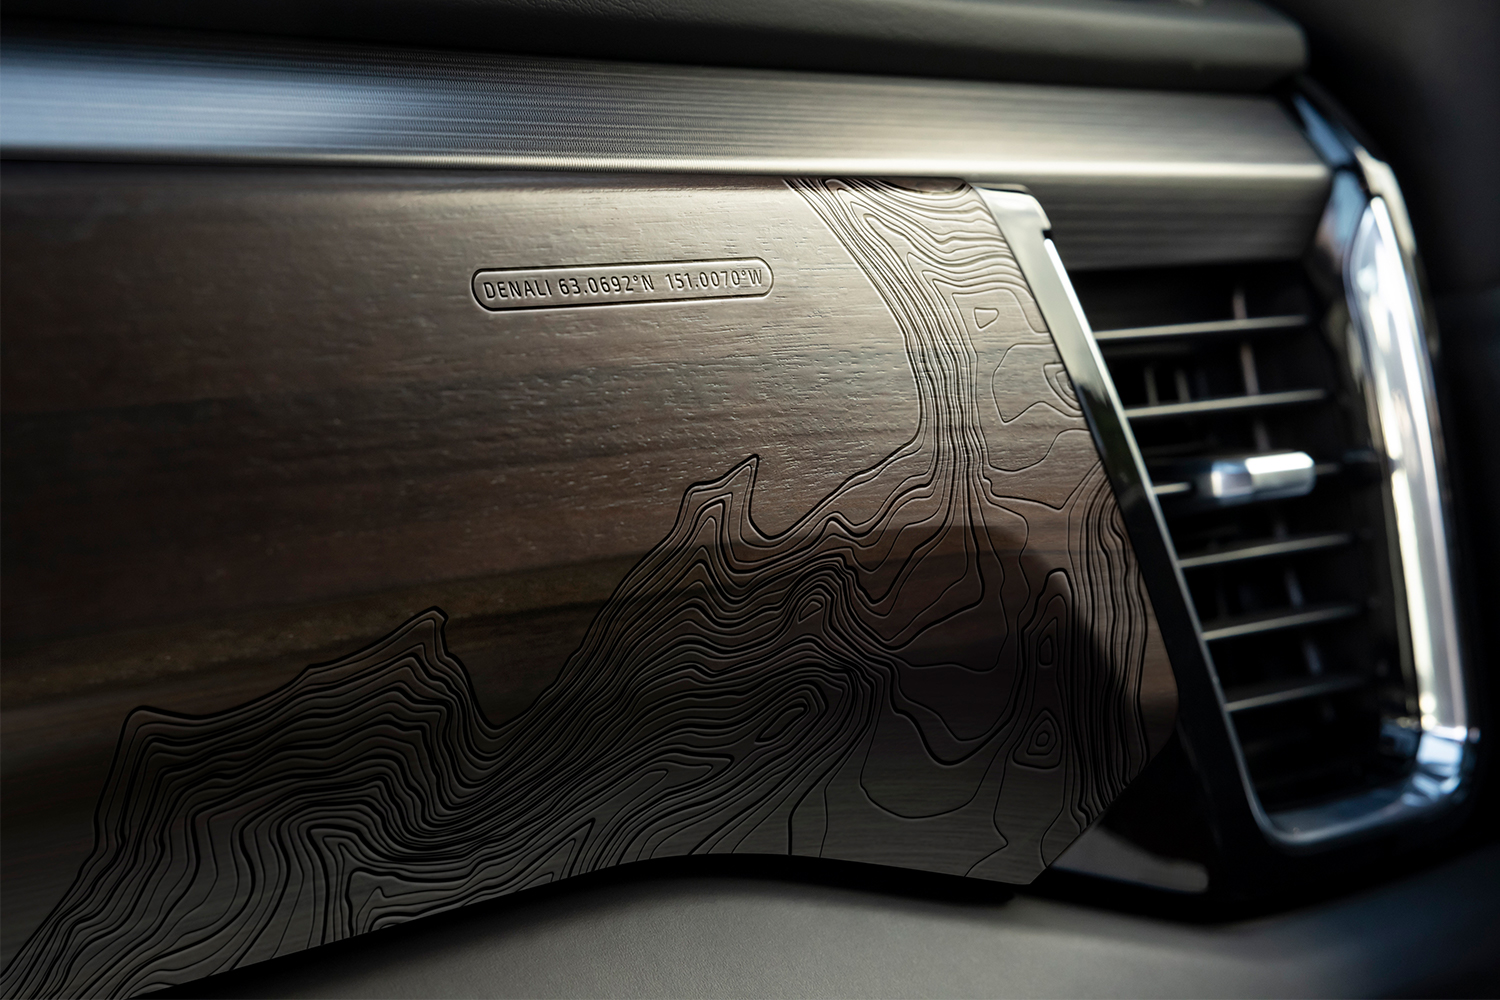 Topographic lines and GPS coordinates for Denali engraved in the wood dashboard of the GMC Sierra Denali Ultimate